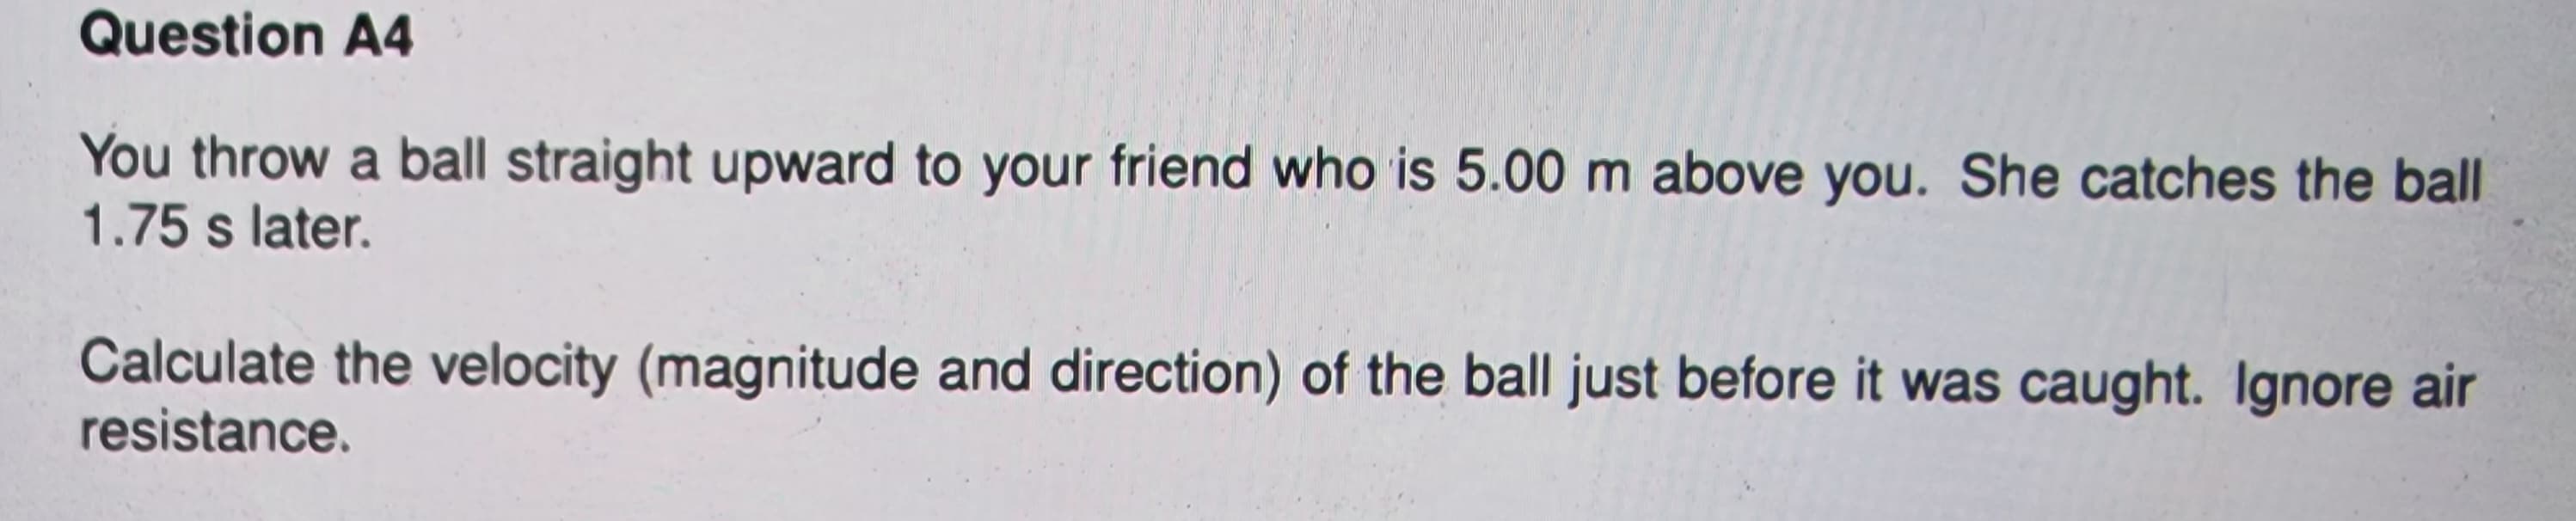 Question A4
You throw a ball straight upward to your friend who is 5.00 m above you. She catches the ball
1.75 s later.
Calculate the velocity (magnitude and direction) of the ball just before it was caught. Ignore air
resistance.